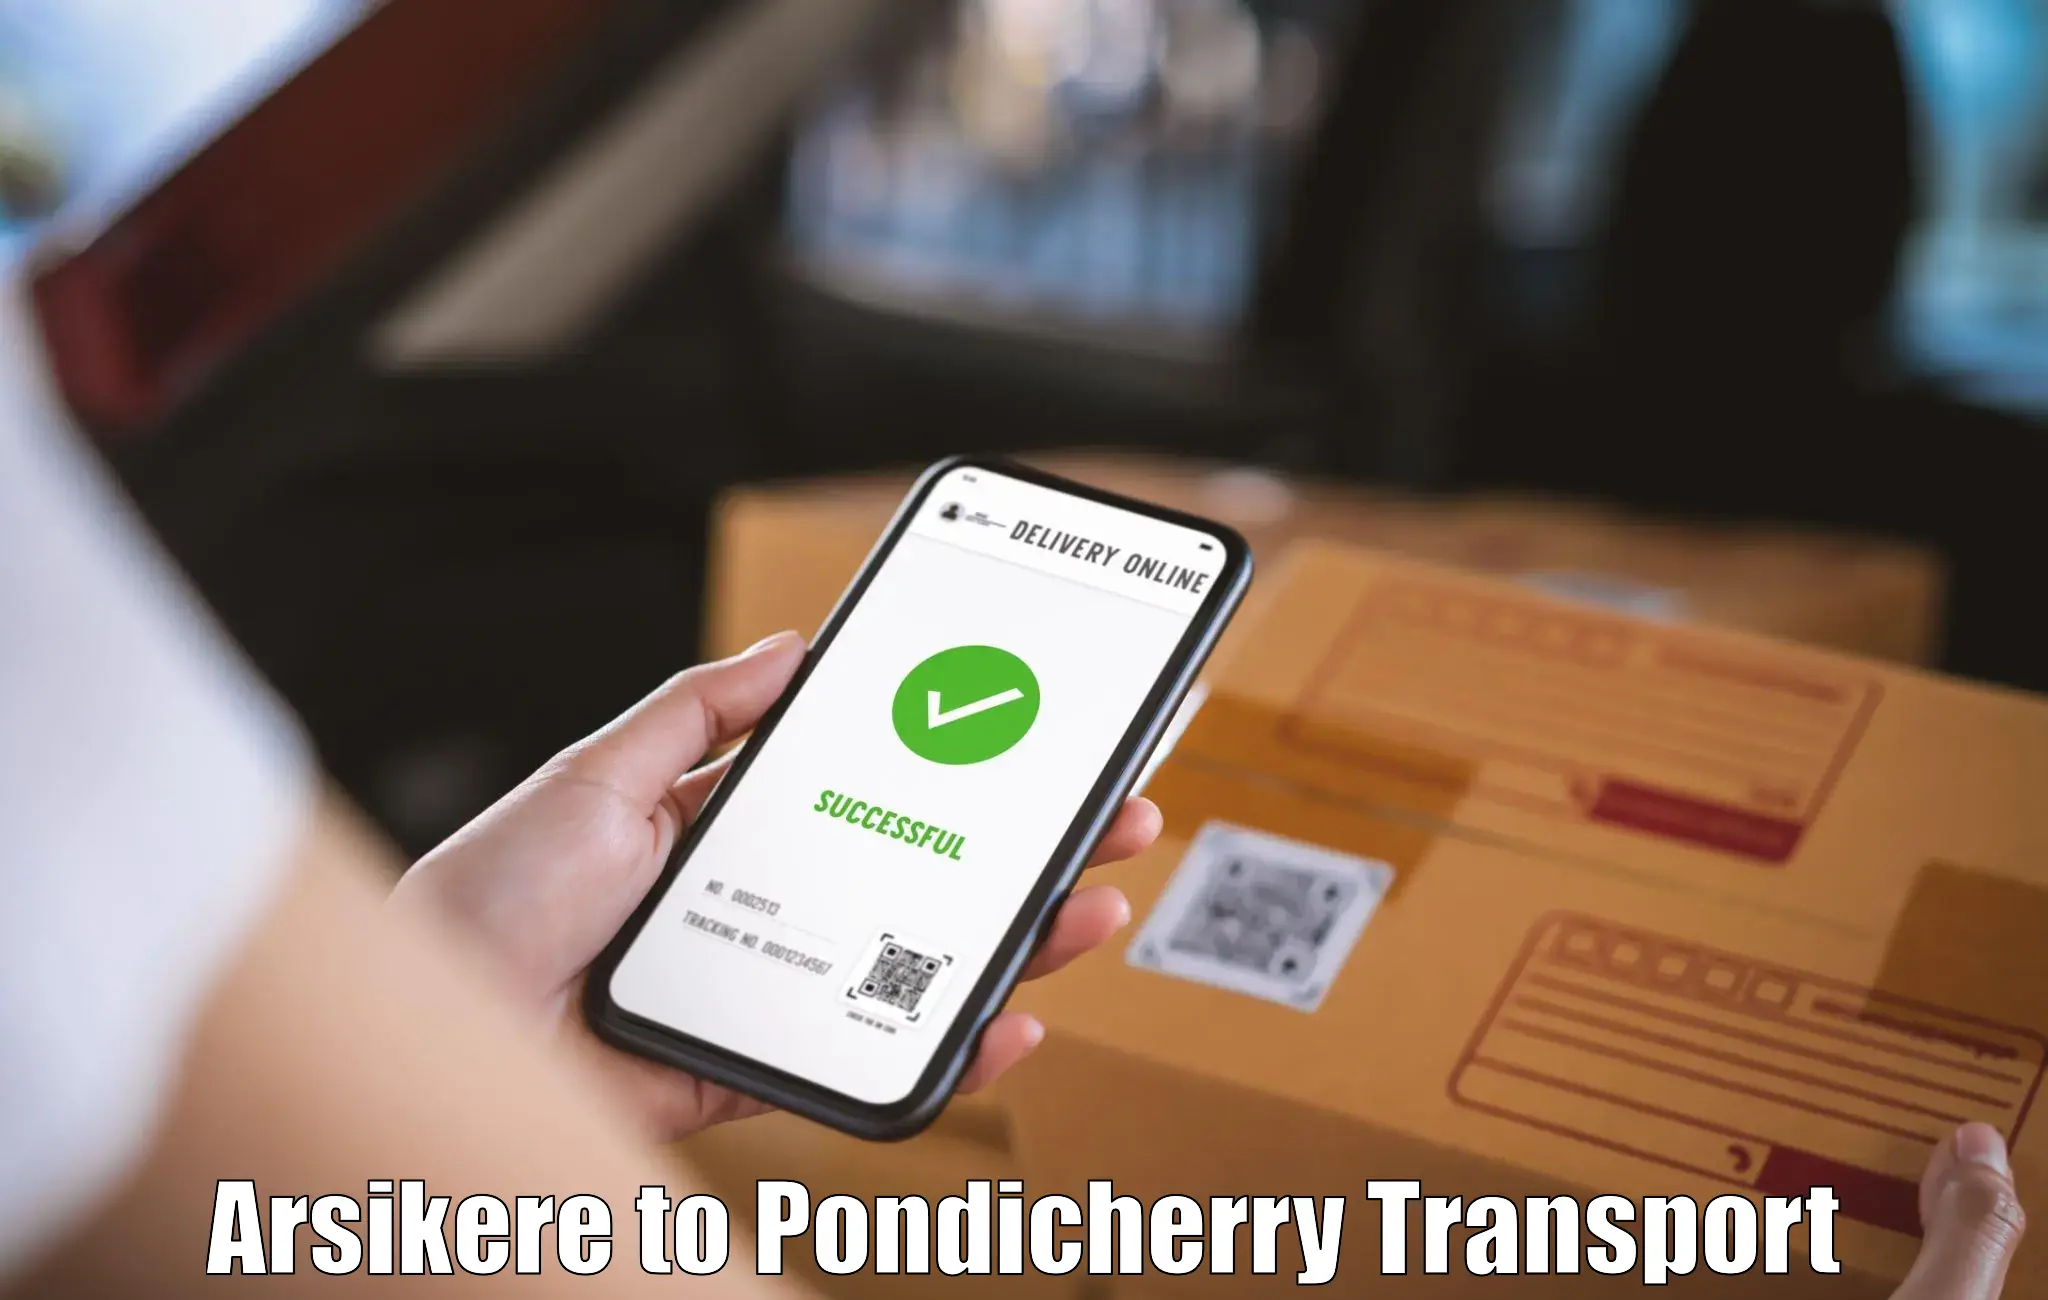 Vehicle transport services Arsikere to Pondicherry